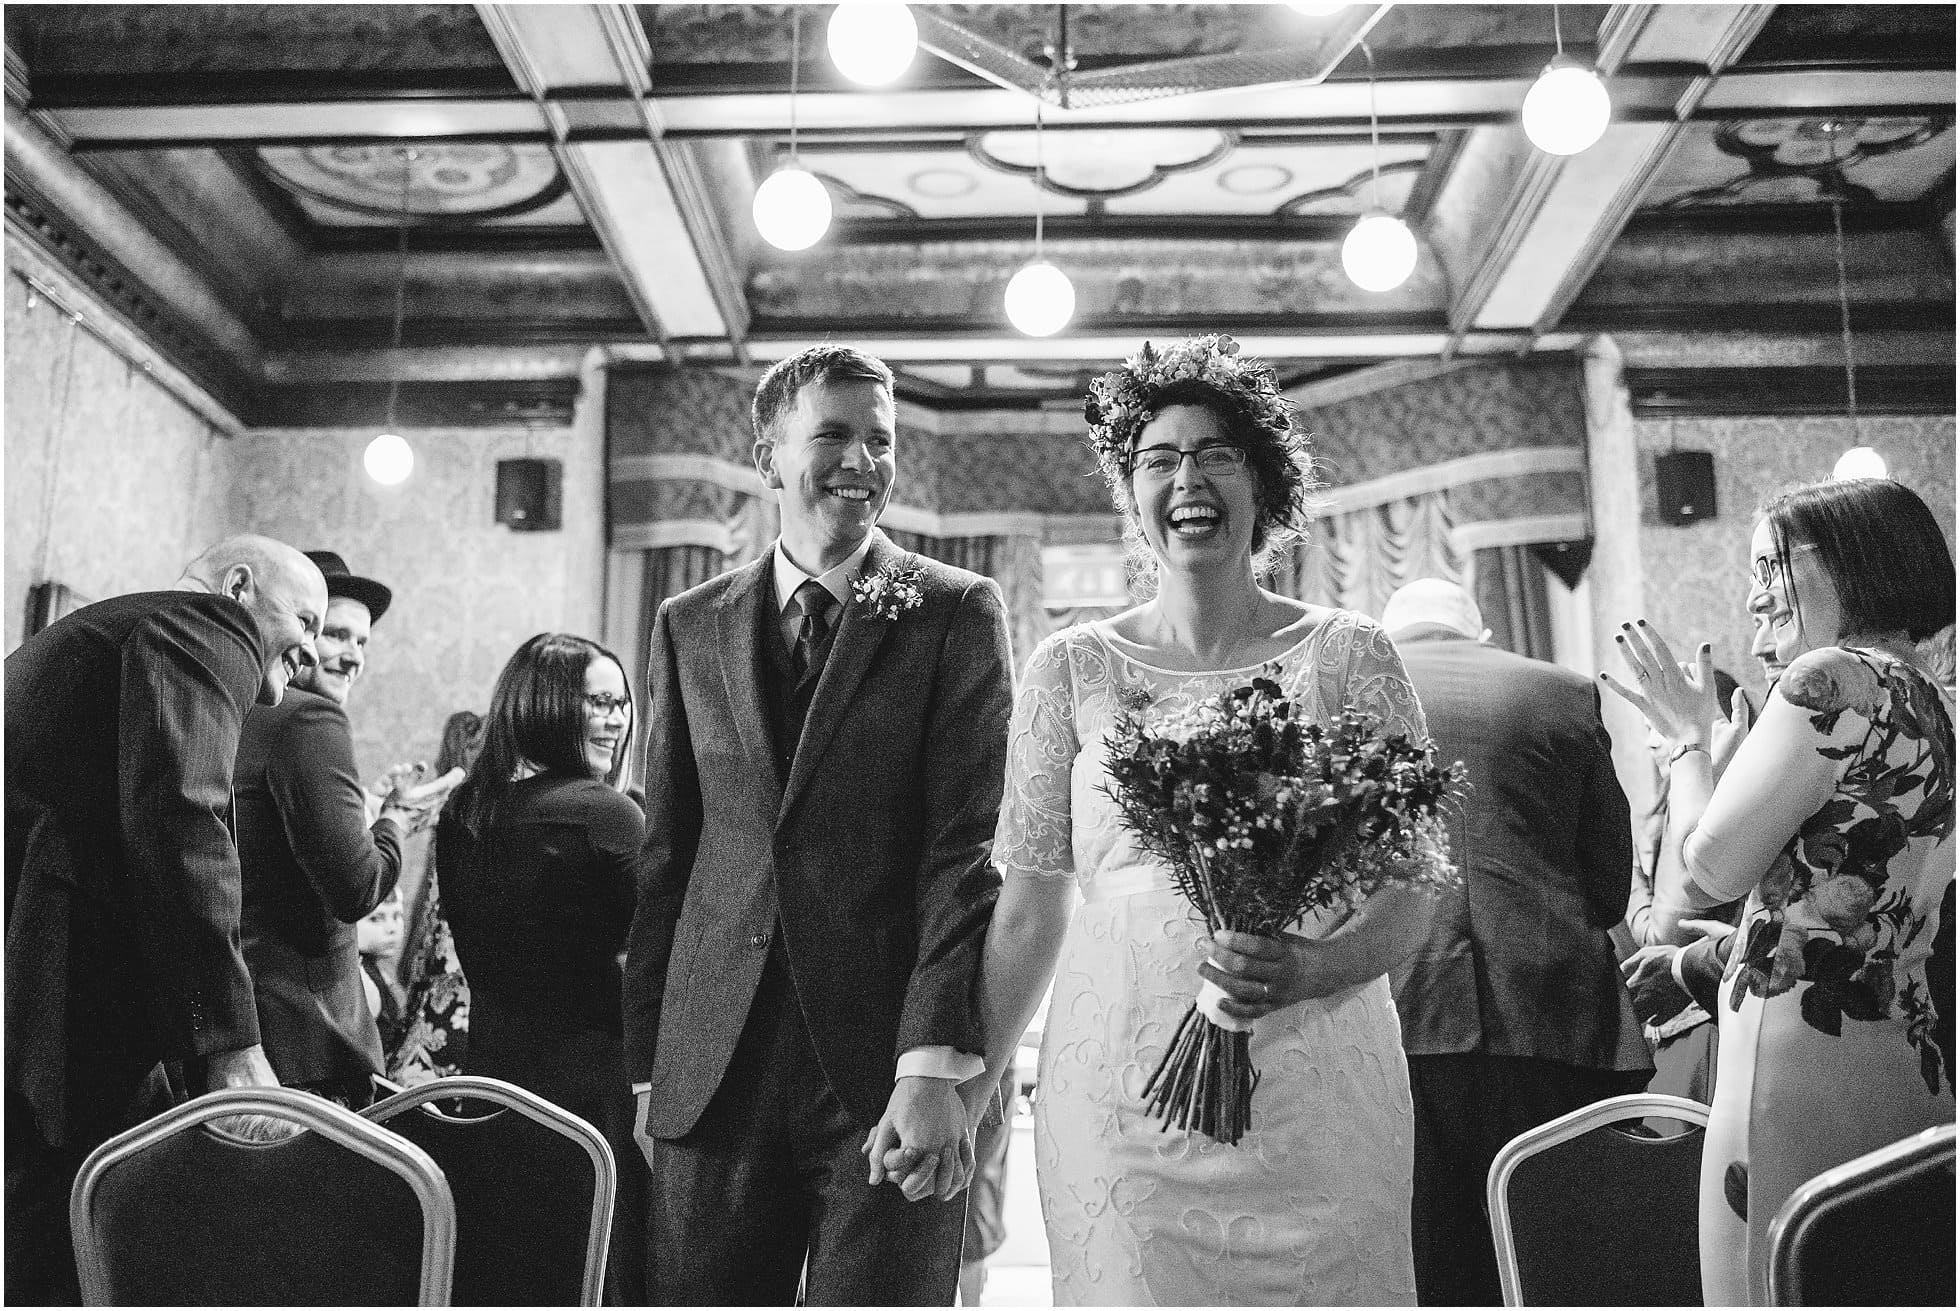 Walking down the aisle as husband and wife